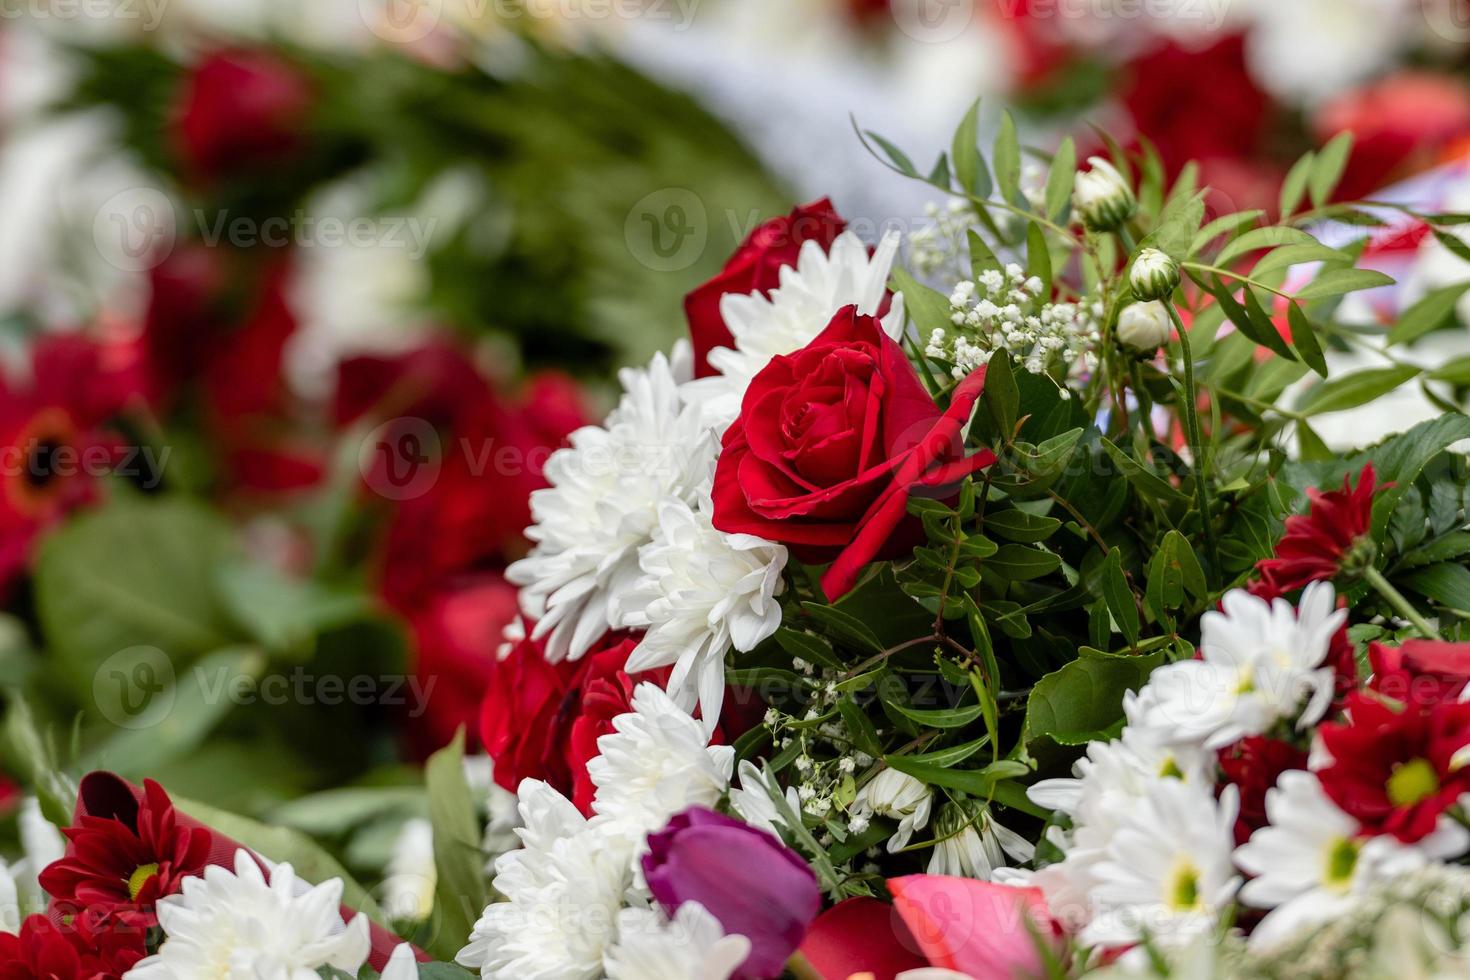 Irregularly placed flowers in various colors, Multi colored floral background - Image photo